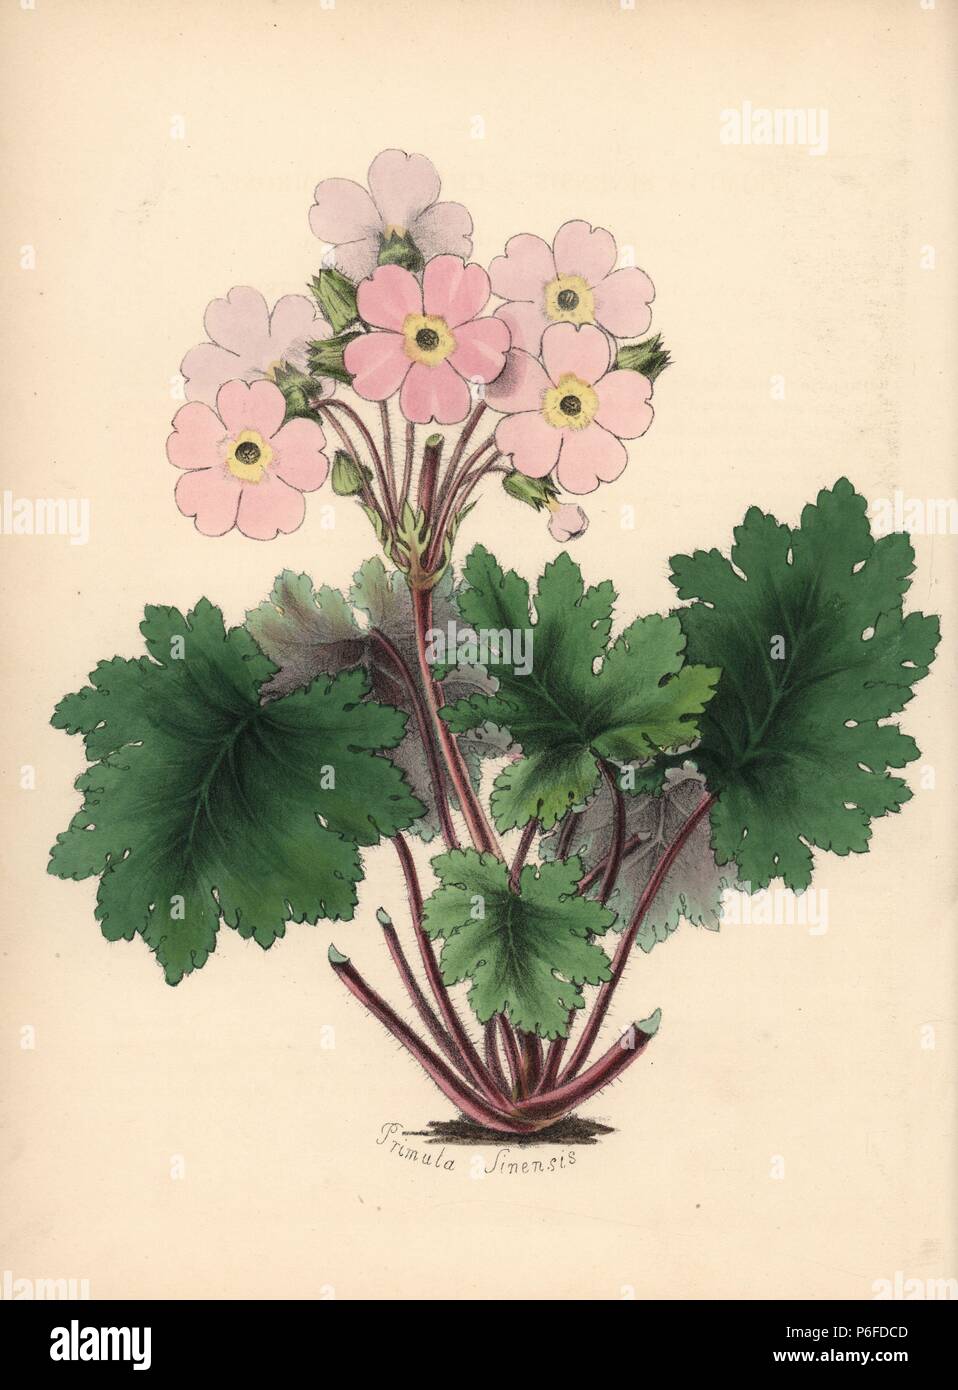 Chinese primrose, Primula sinensis. Handcoloured zincograph by Chabots drawn by Miss M. A. Burnett from her 'Plantae Utiliores: or Illustrations of Useful Plants,' Whittaker, London, 1842. Miss Burnett drew the botanical illustrations, but the text was chiefly by her late brother, British botanist Gilbert Thomas Burnett (1800-1835). Stock Photo